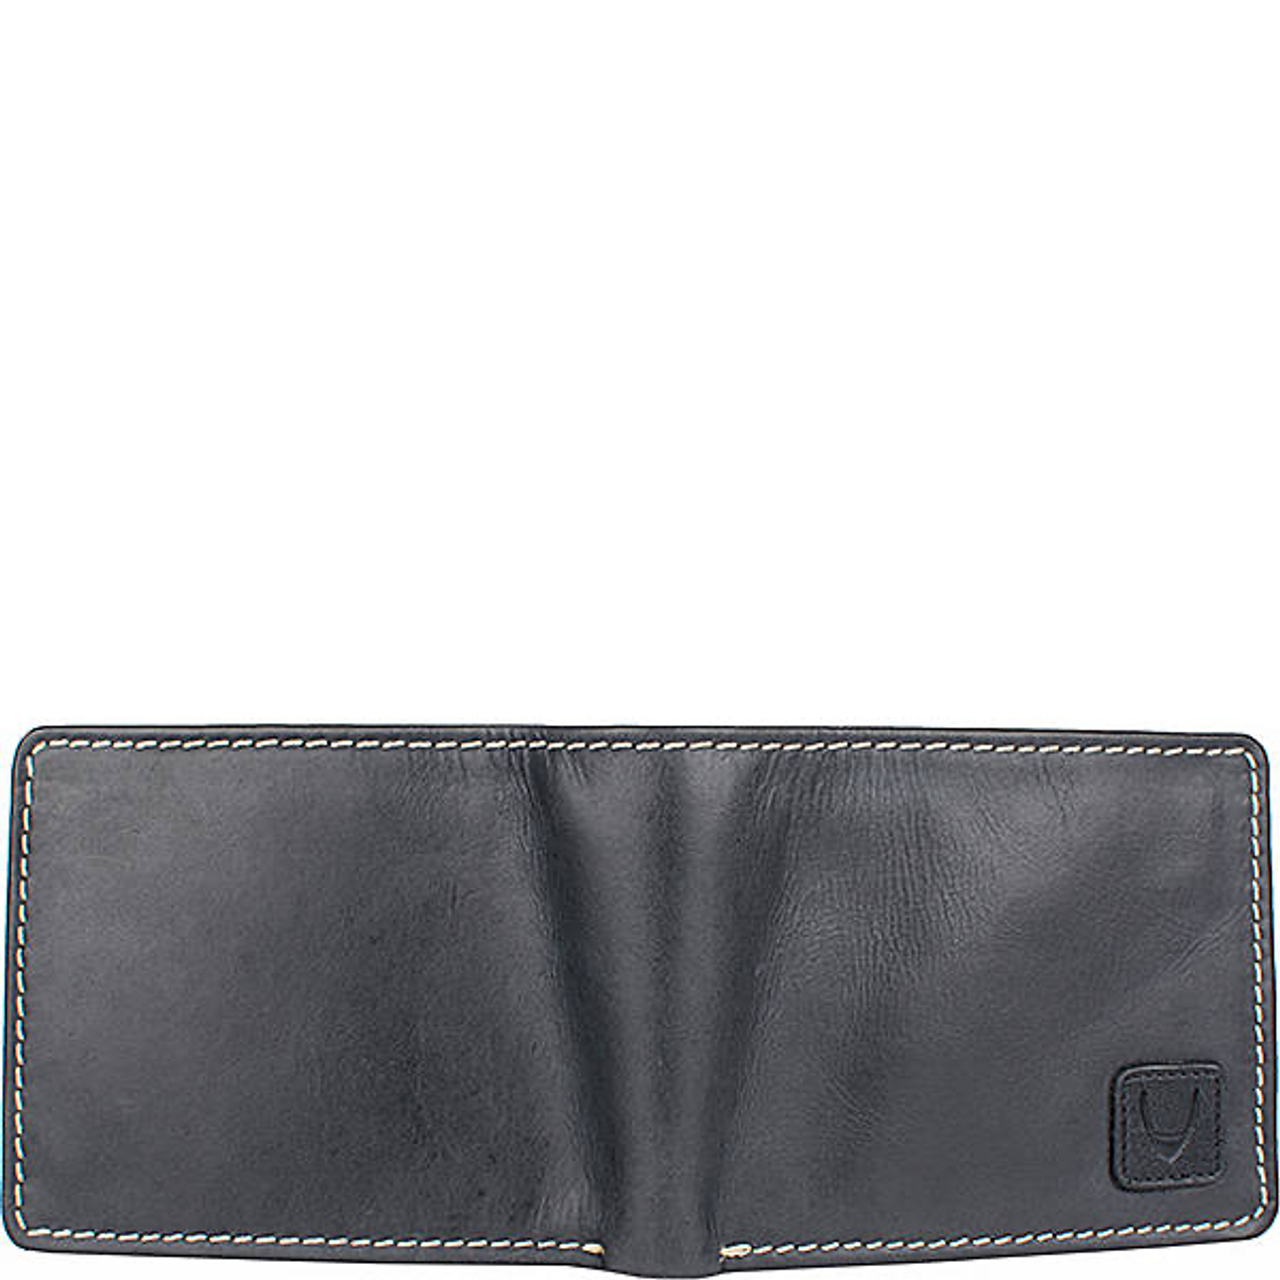 Camel Stitch RFID Blocking Trifold Leather Wallet - Leather Loom